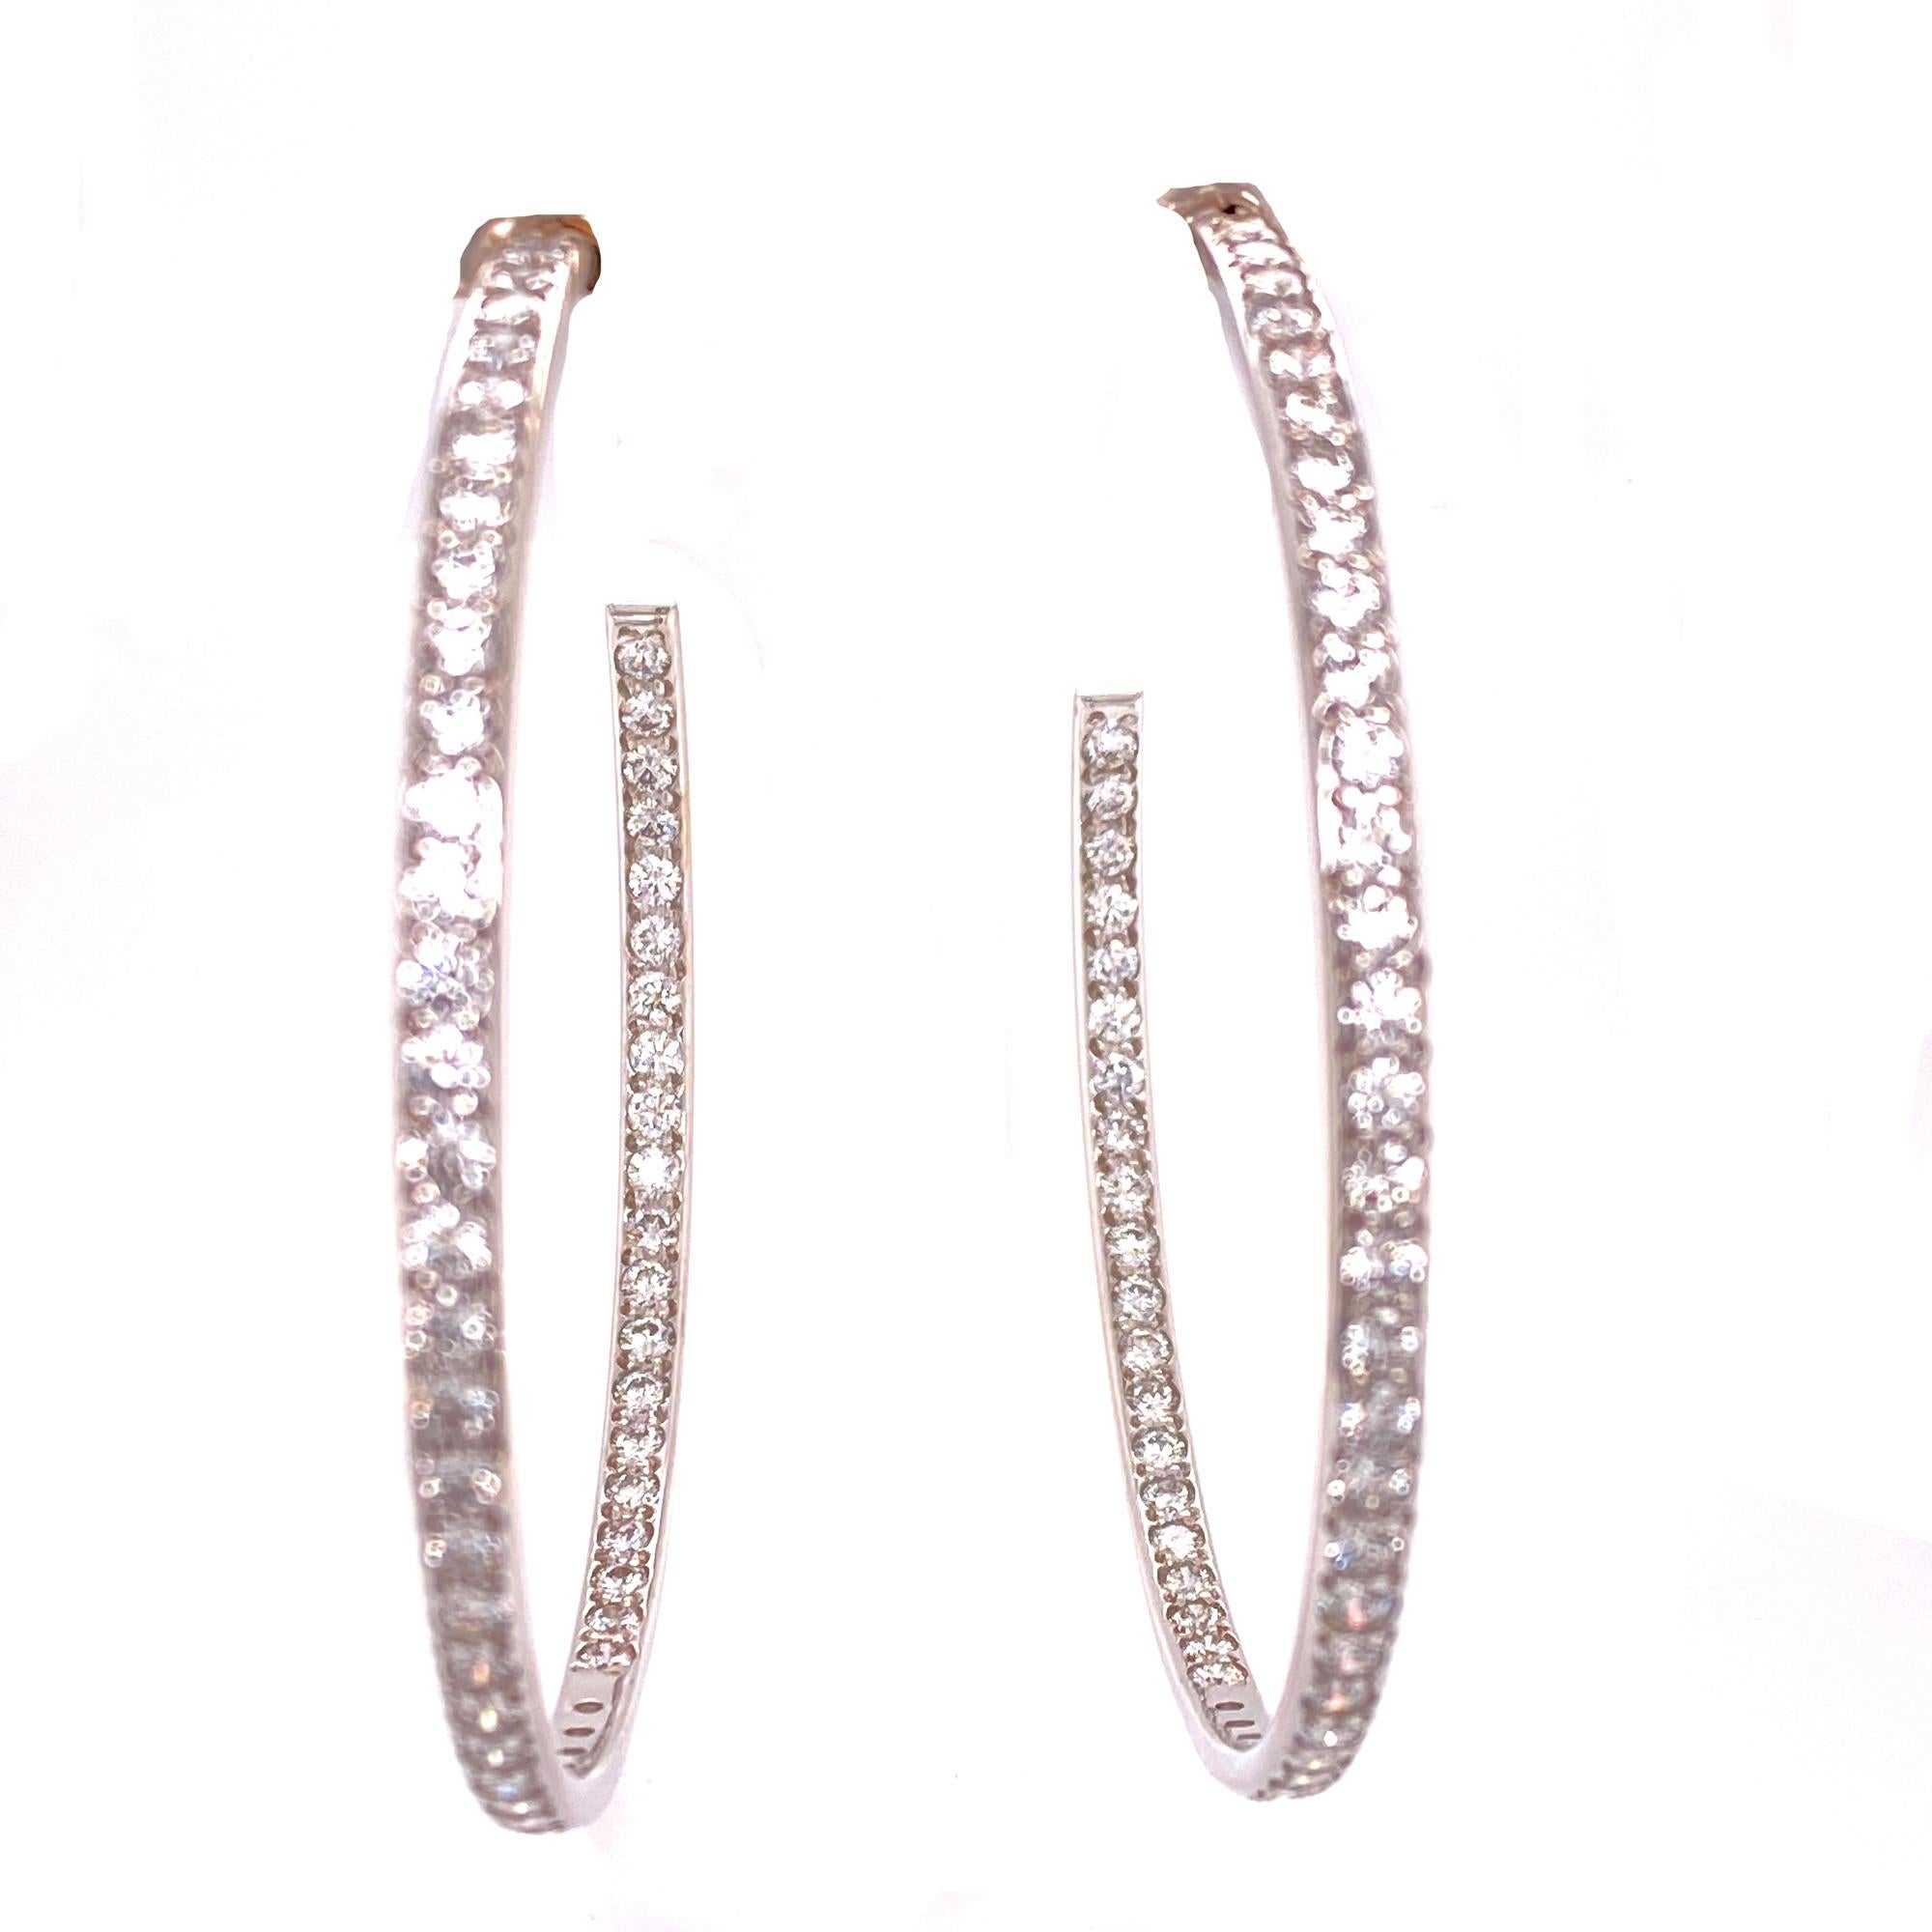 Large Diamond In and Out Hoop earrings fashioned in 18 karat white gold. The earrings feature 6.00 carat total weight of round brilliant cut diamonds graded F-G color and VS clarity. The hoops measure 2 inches in length and width. 